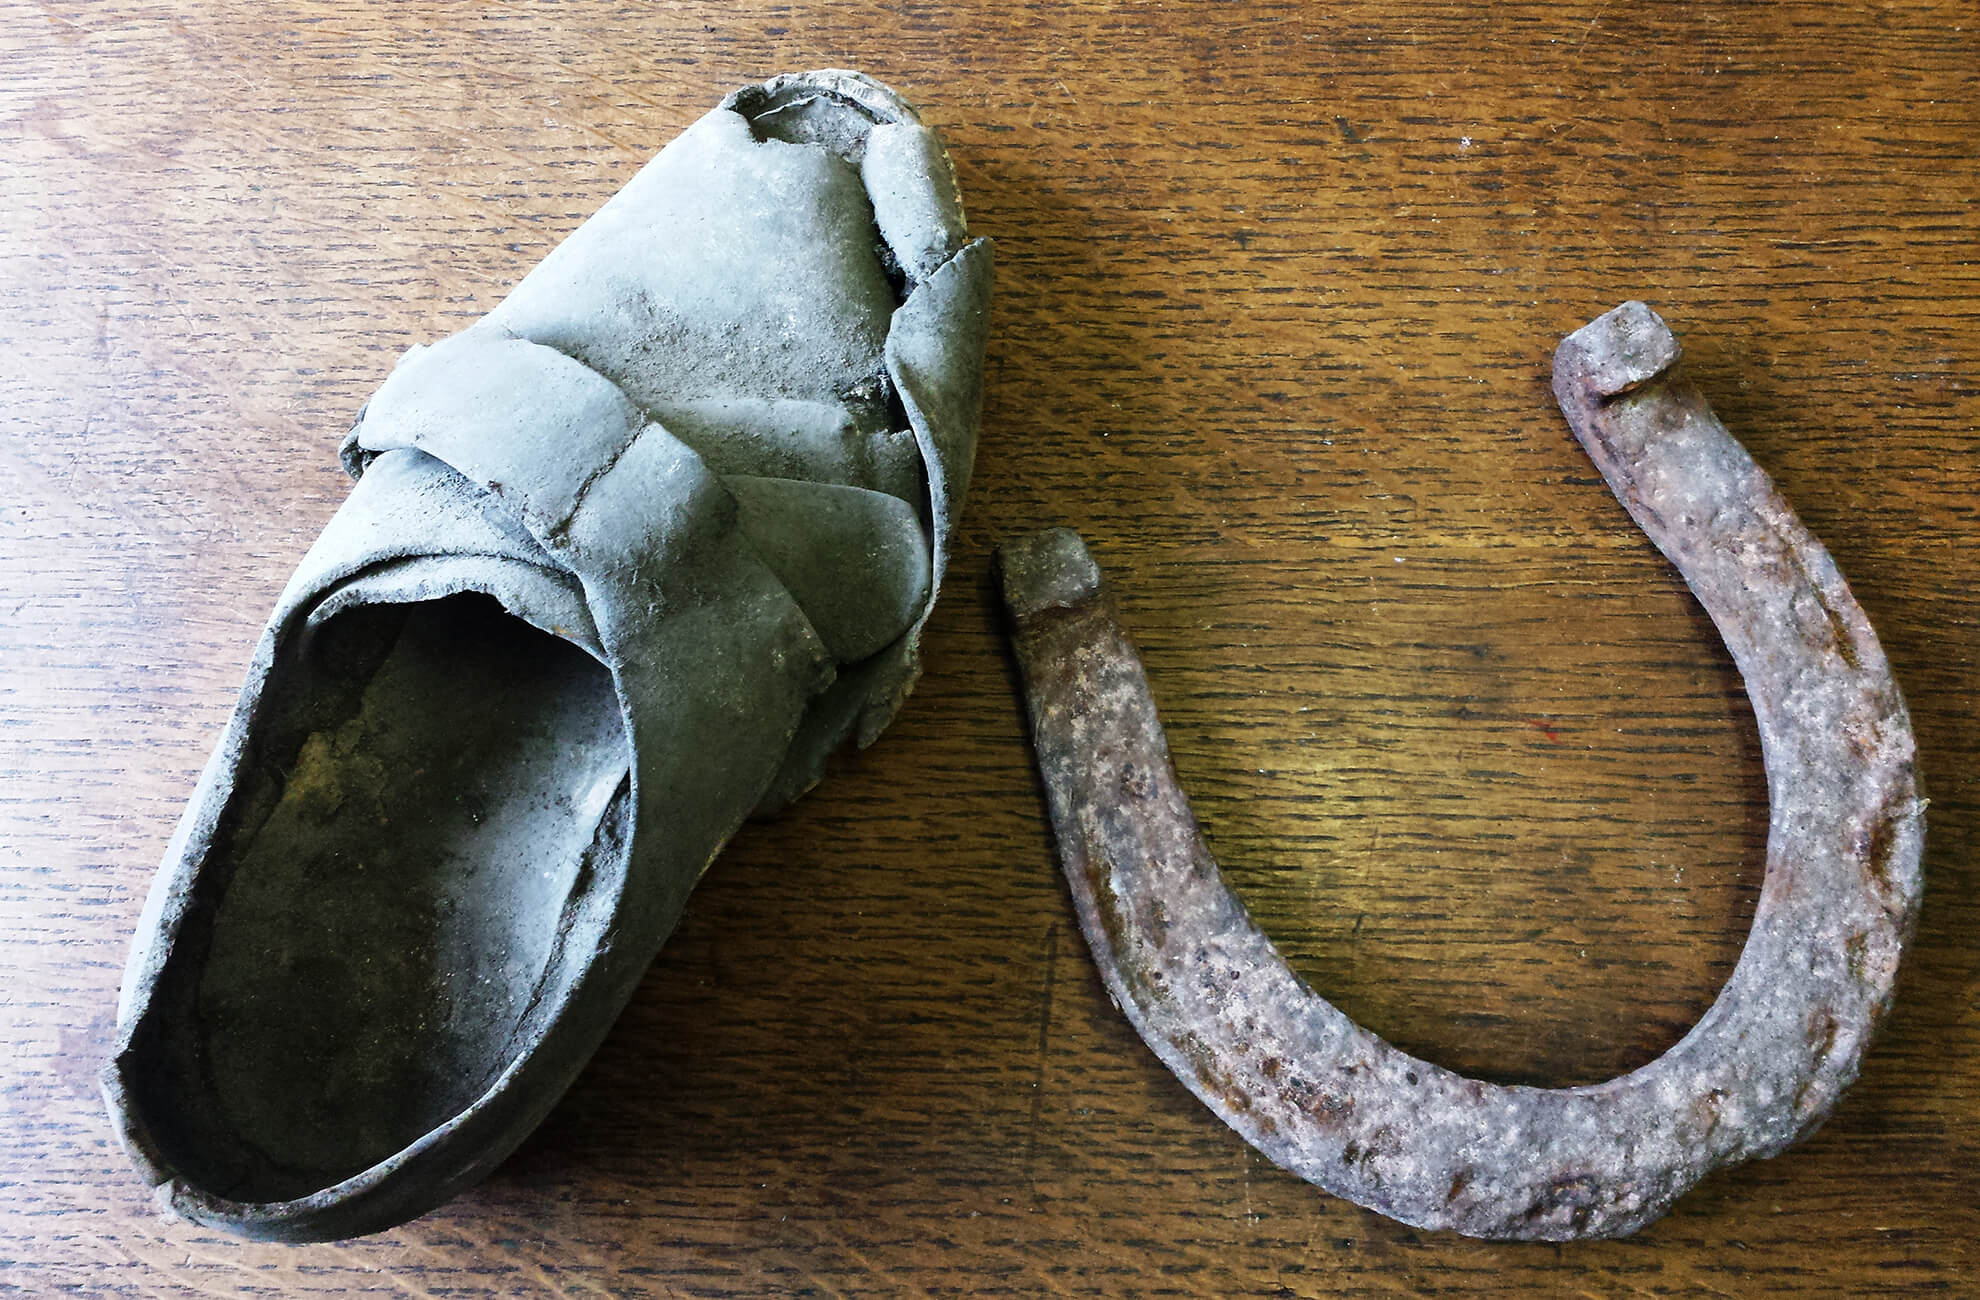 A man’s shoe and a large horseshoe were uncovered during the restoration work at Combermere Abbey